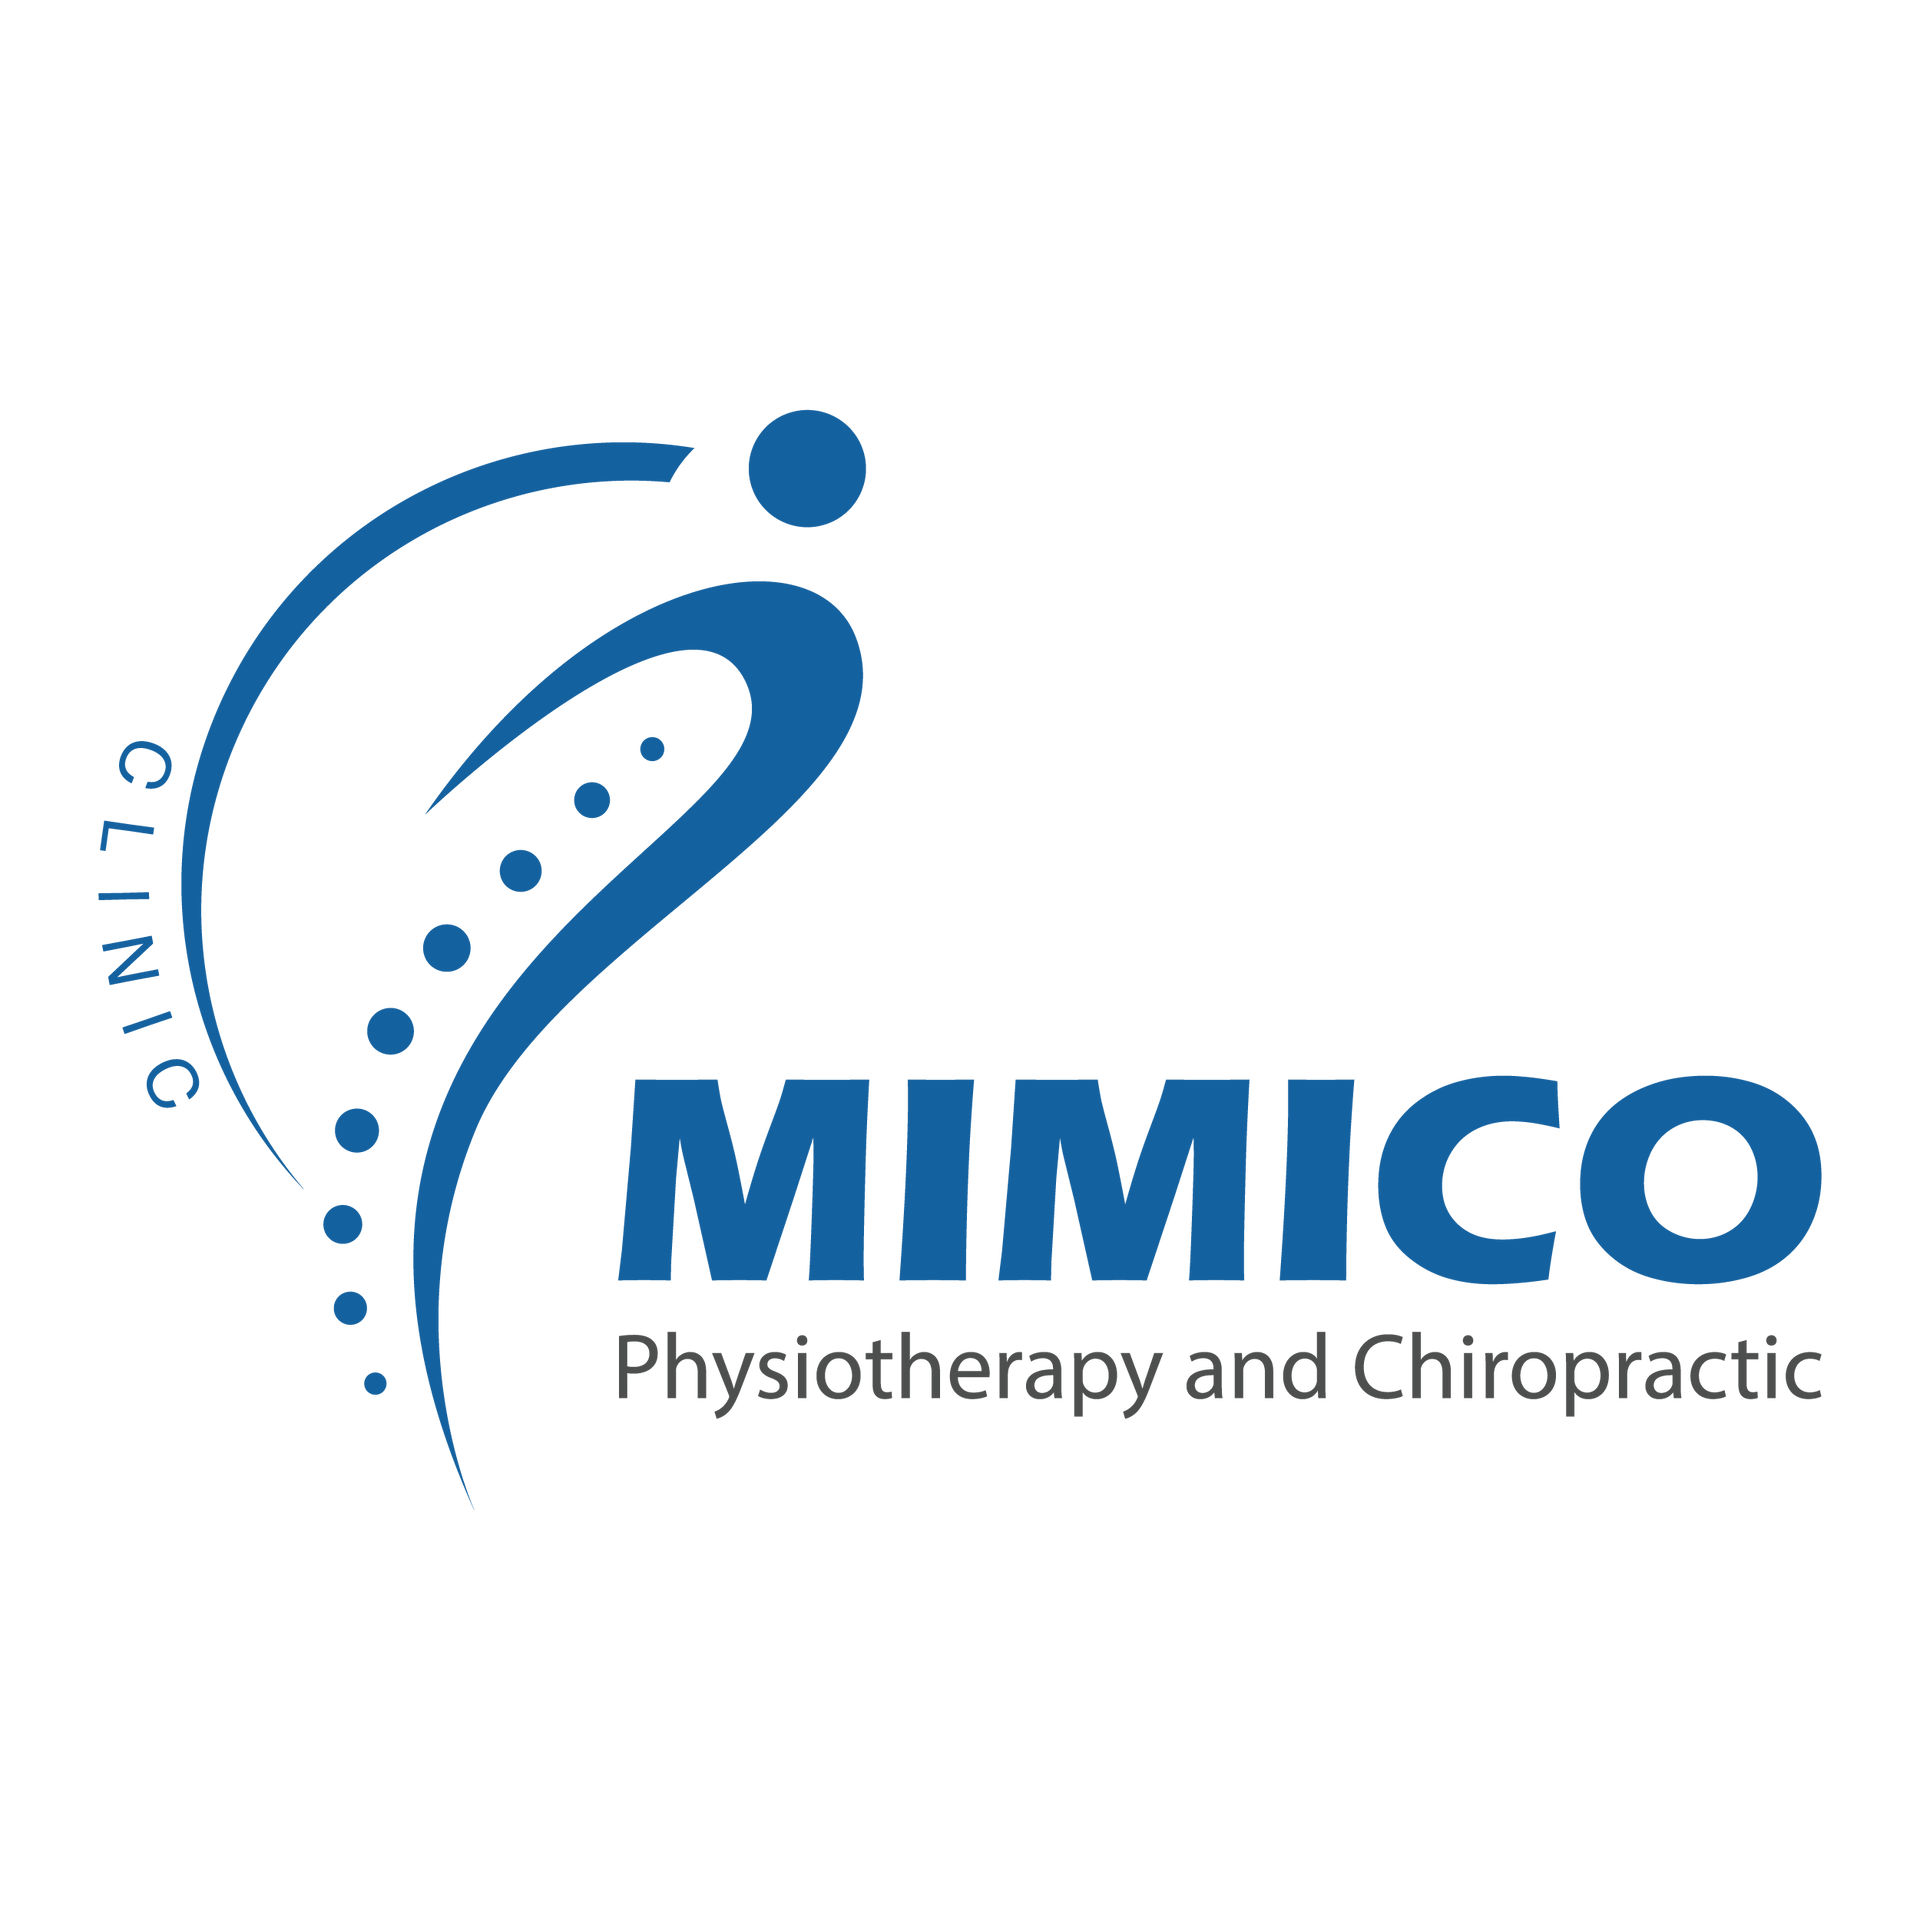 The logo for mimico physiotherapy and chiropractic is blue and white.